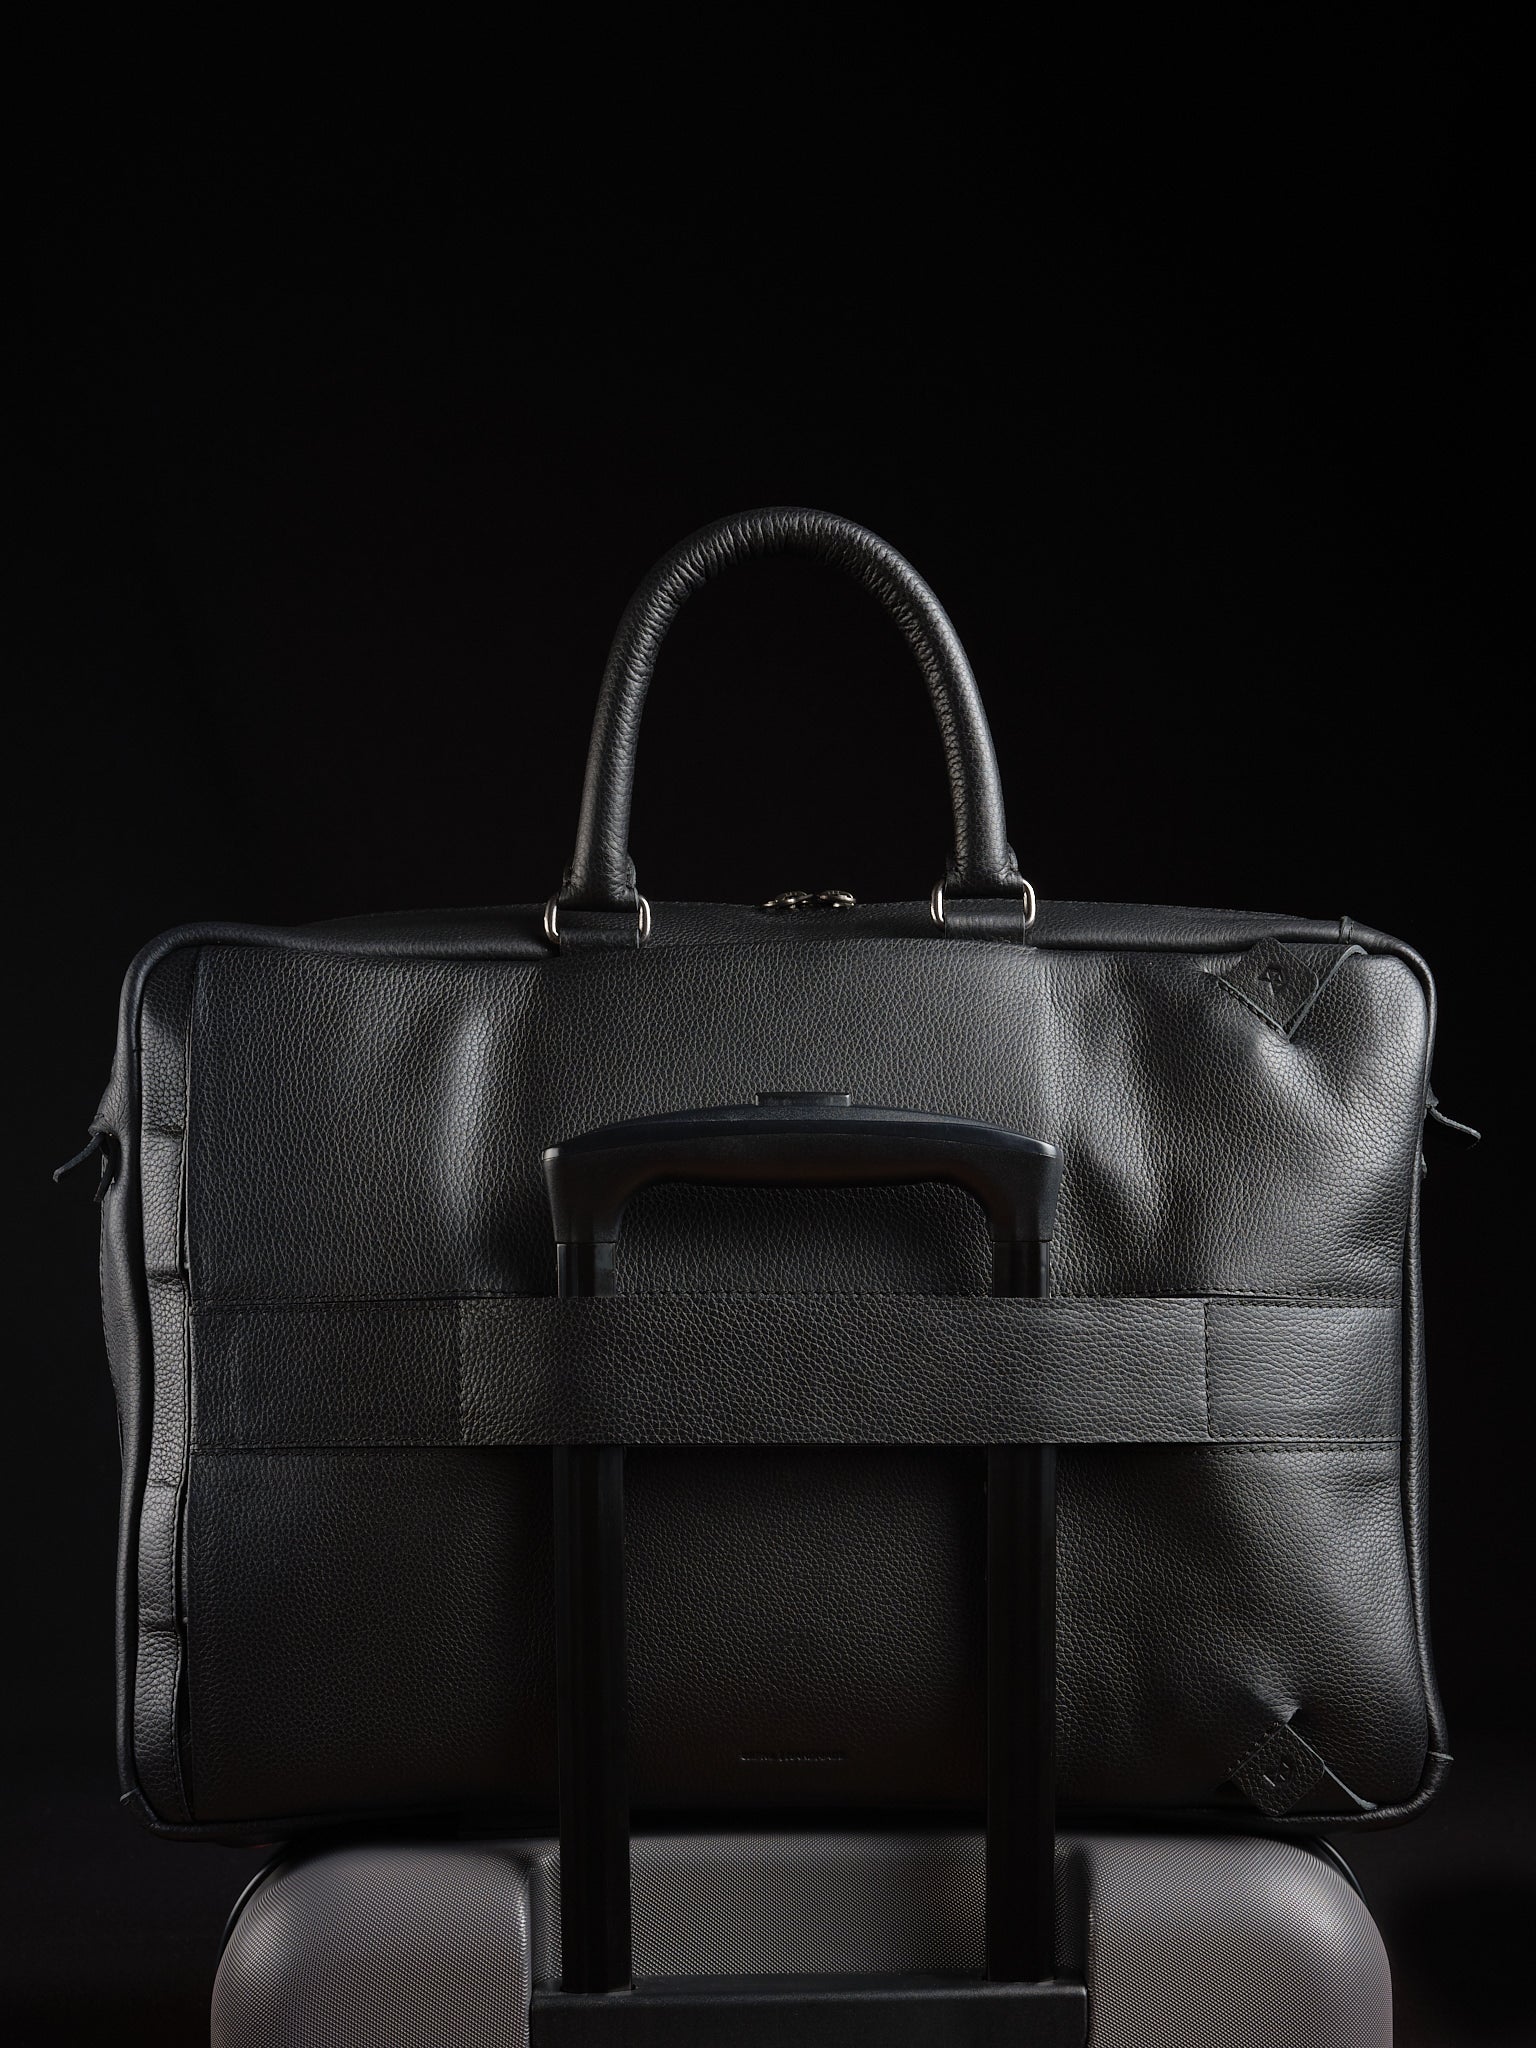 Optional Luggage Strap. Backpack Briefcase Leather Black by Capra